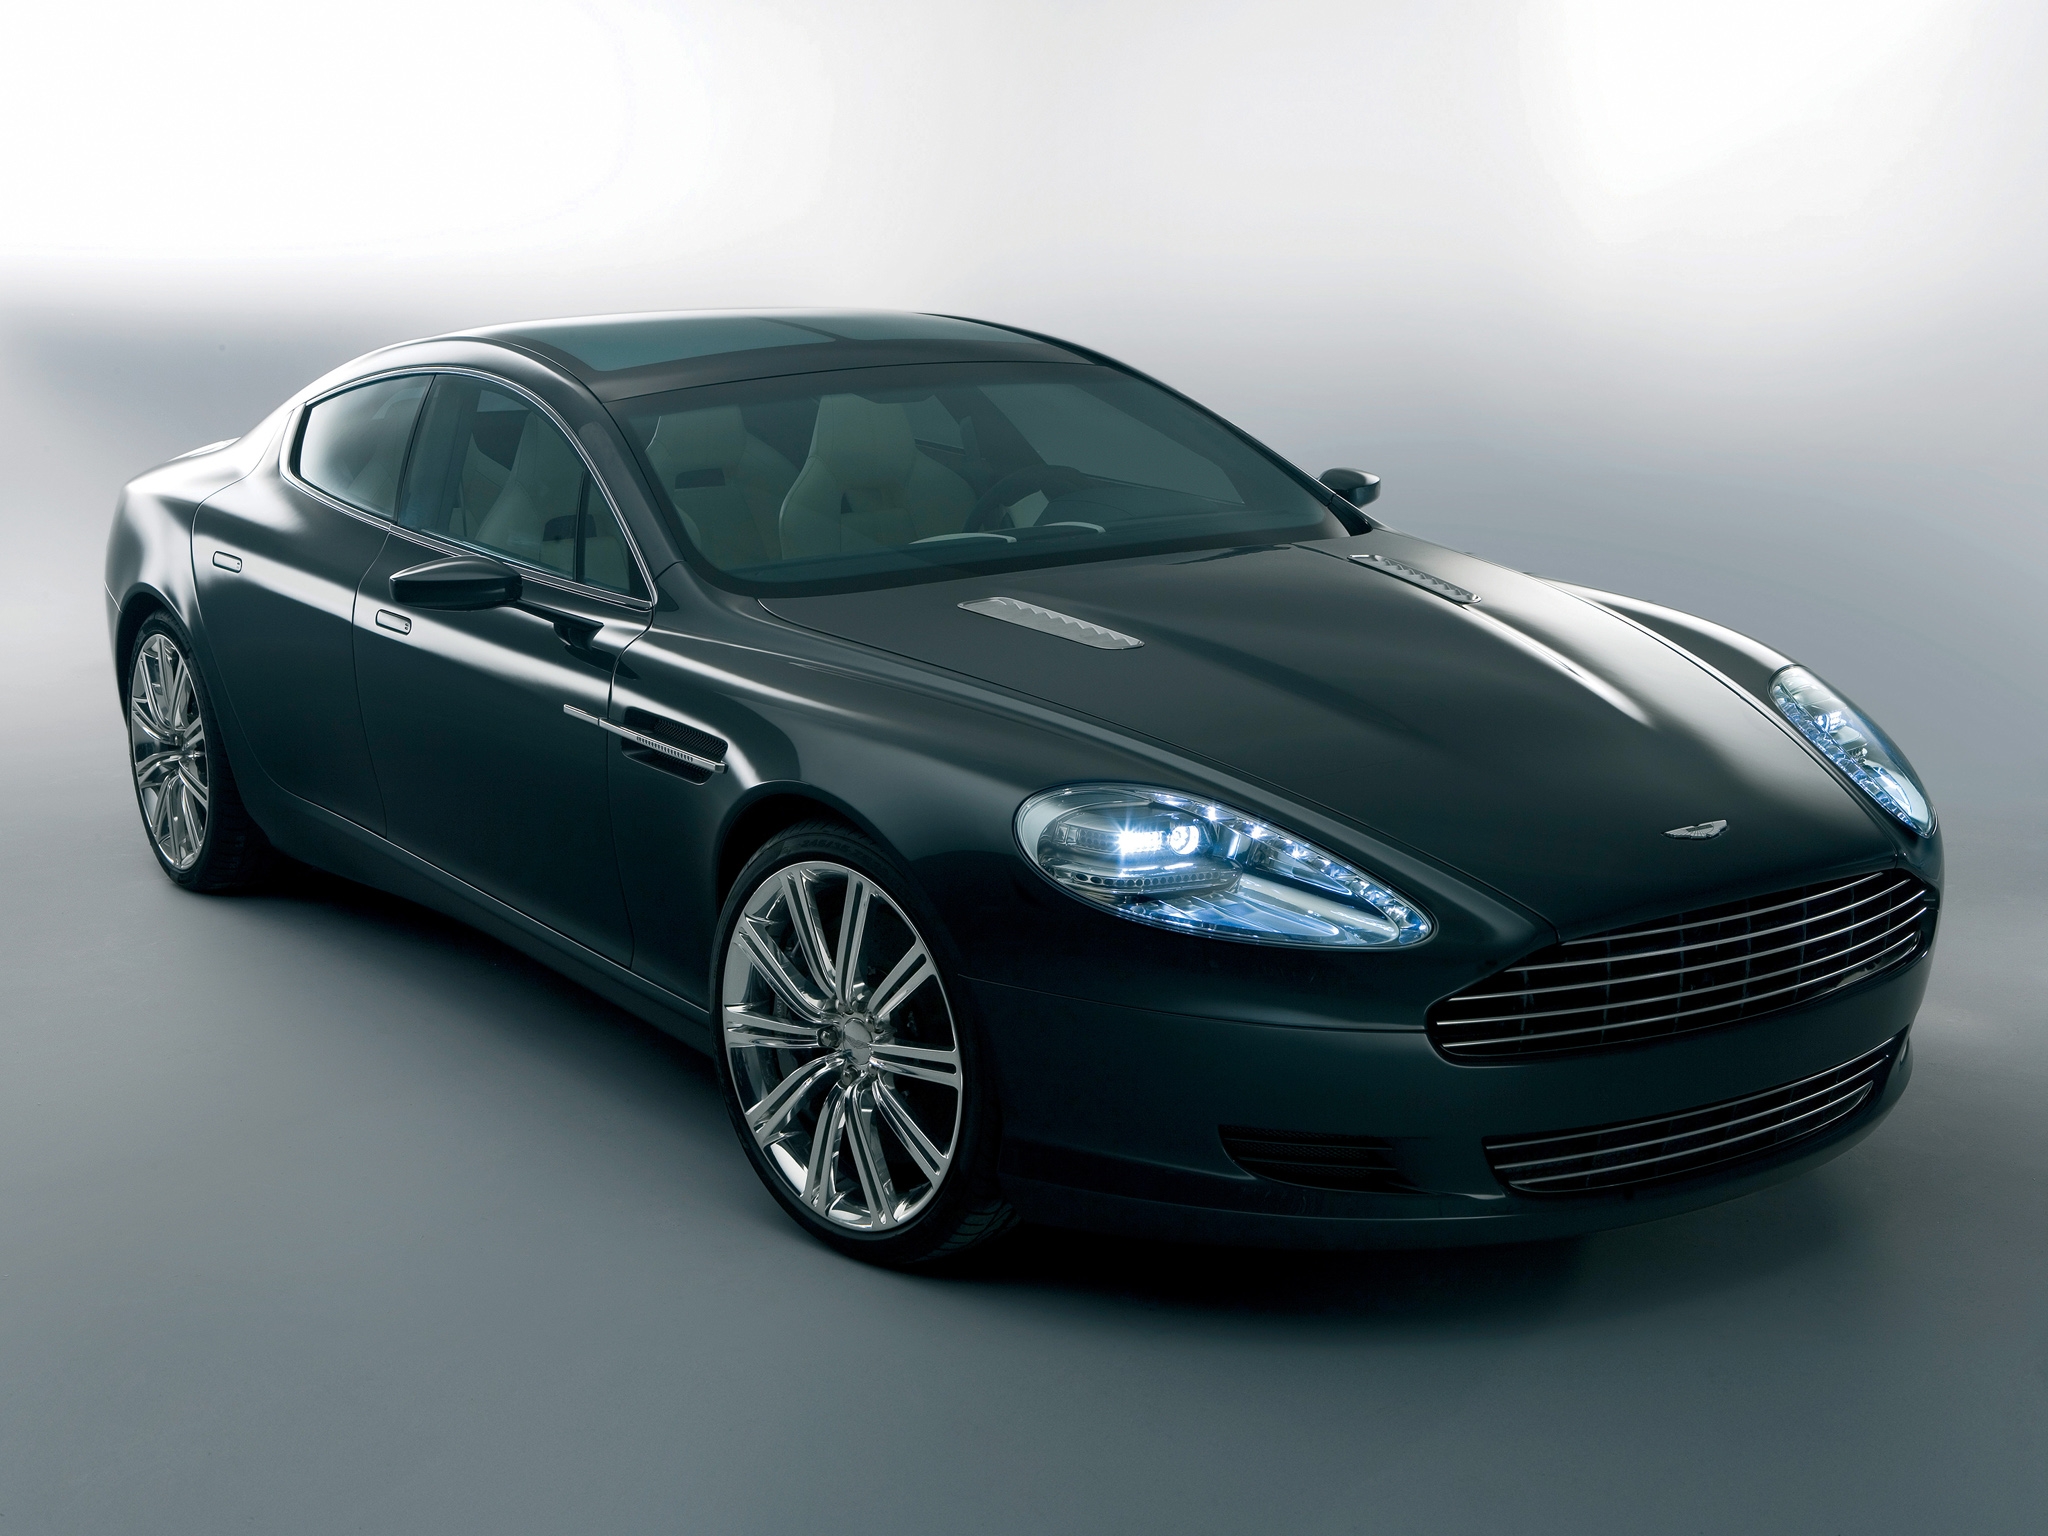 118321 download wallpaper aston martin, cars, black, front view, style, concept car, 2006, rapide screensavers and pictures for free